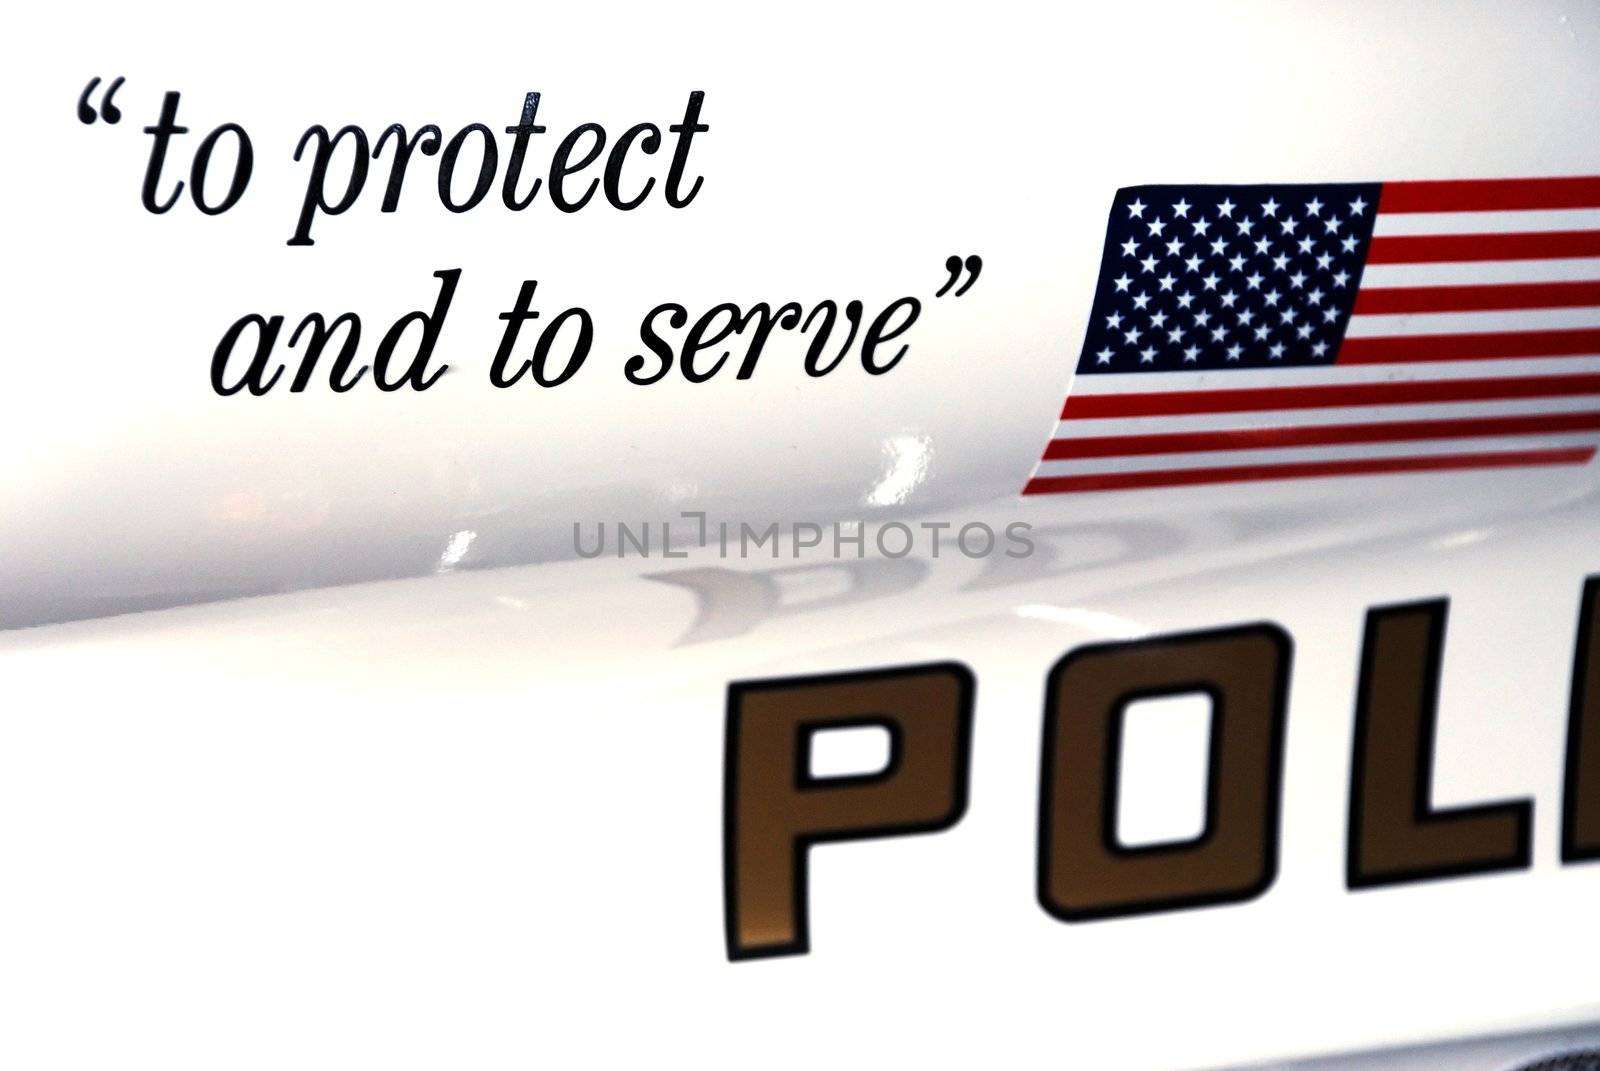 Police Decal and Flag by pixelsnap